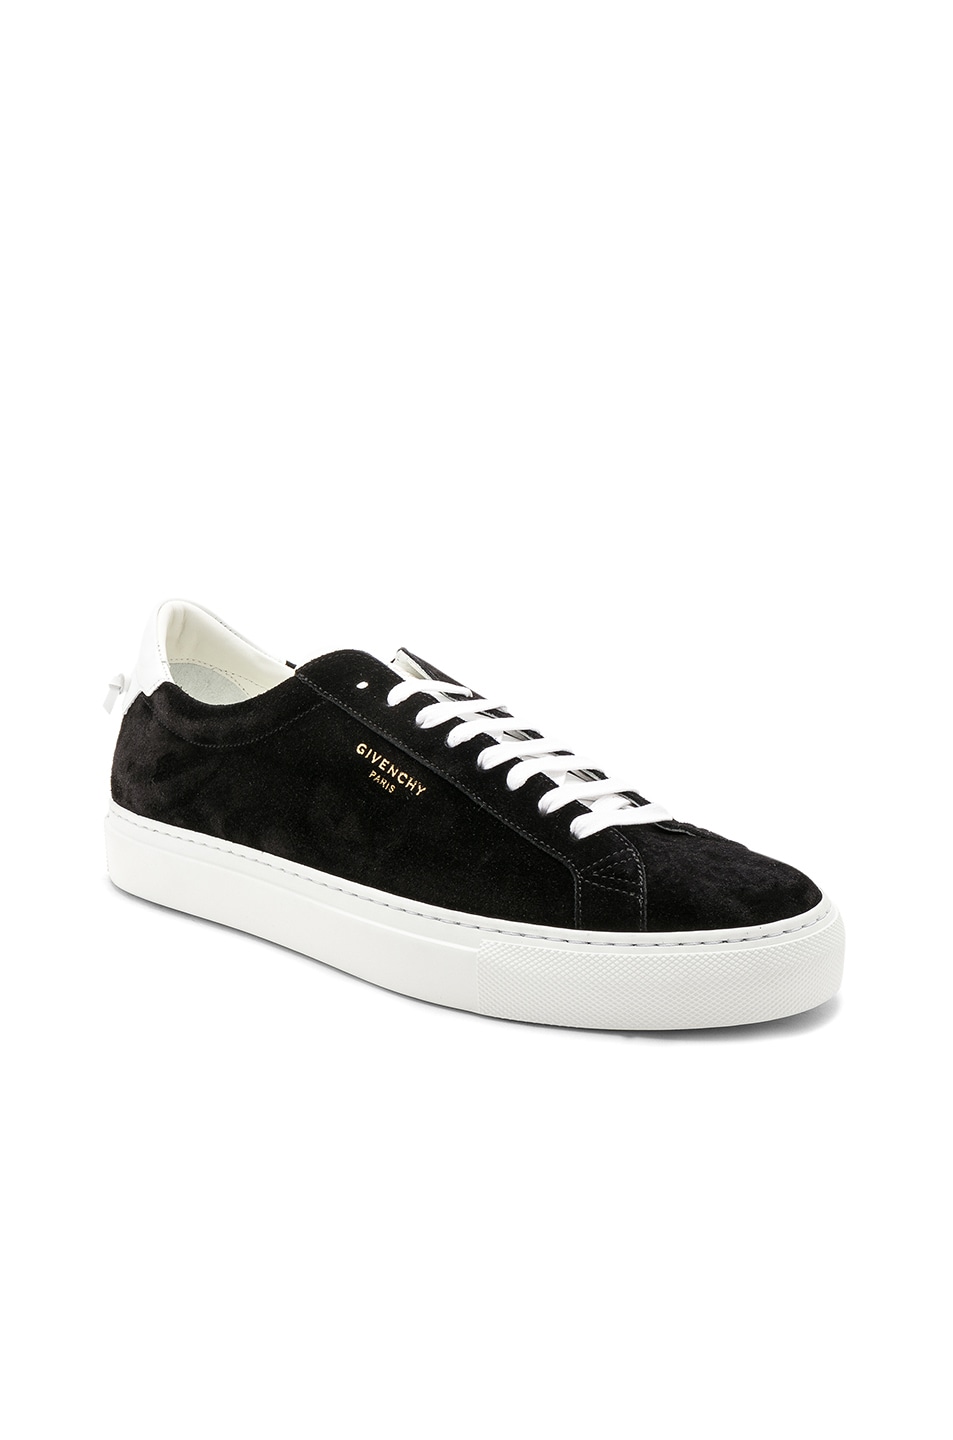 Image 1 of Givenchy Suede Urban Street Low Top Sneakers in Black & White